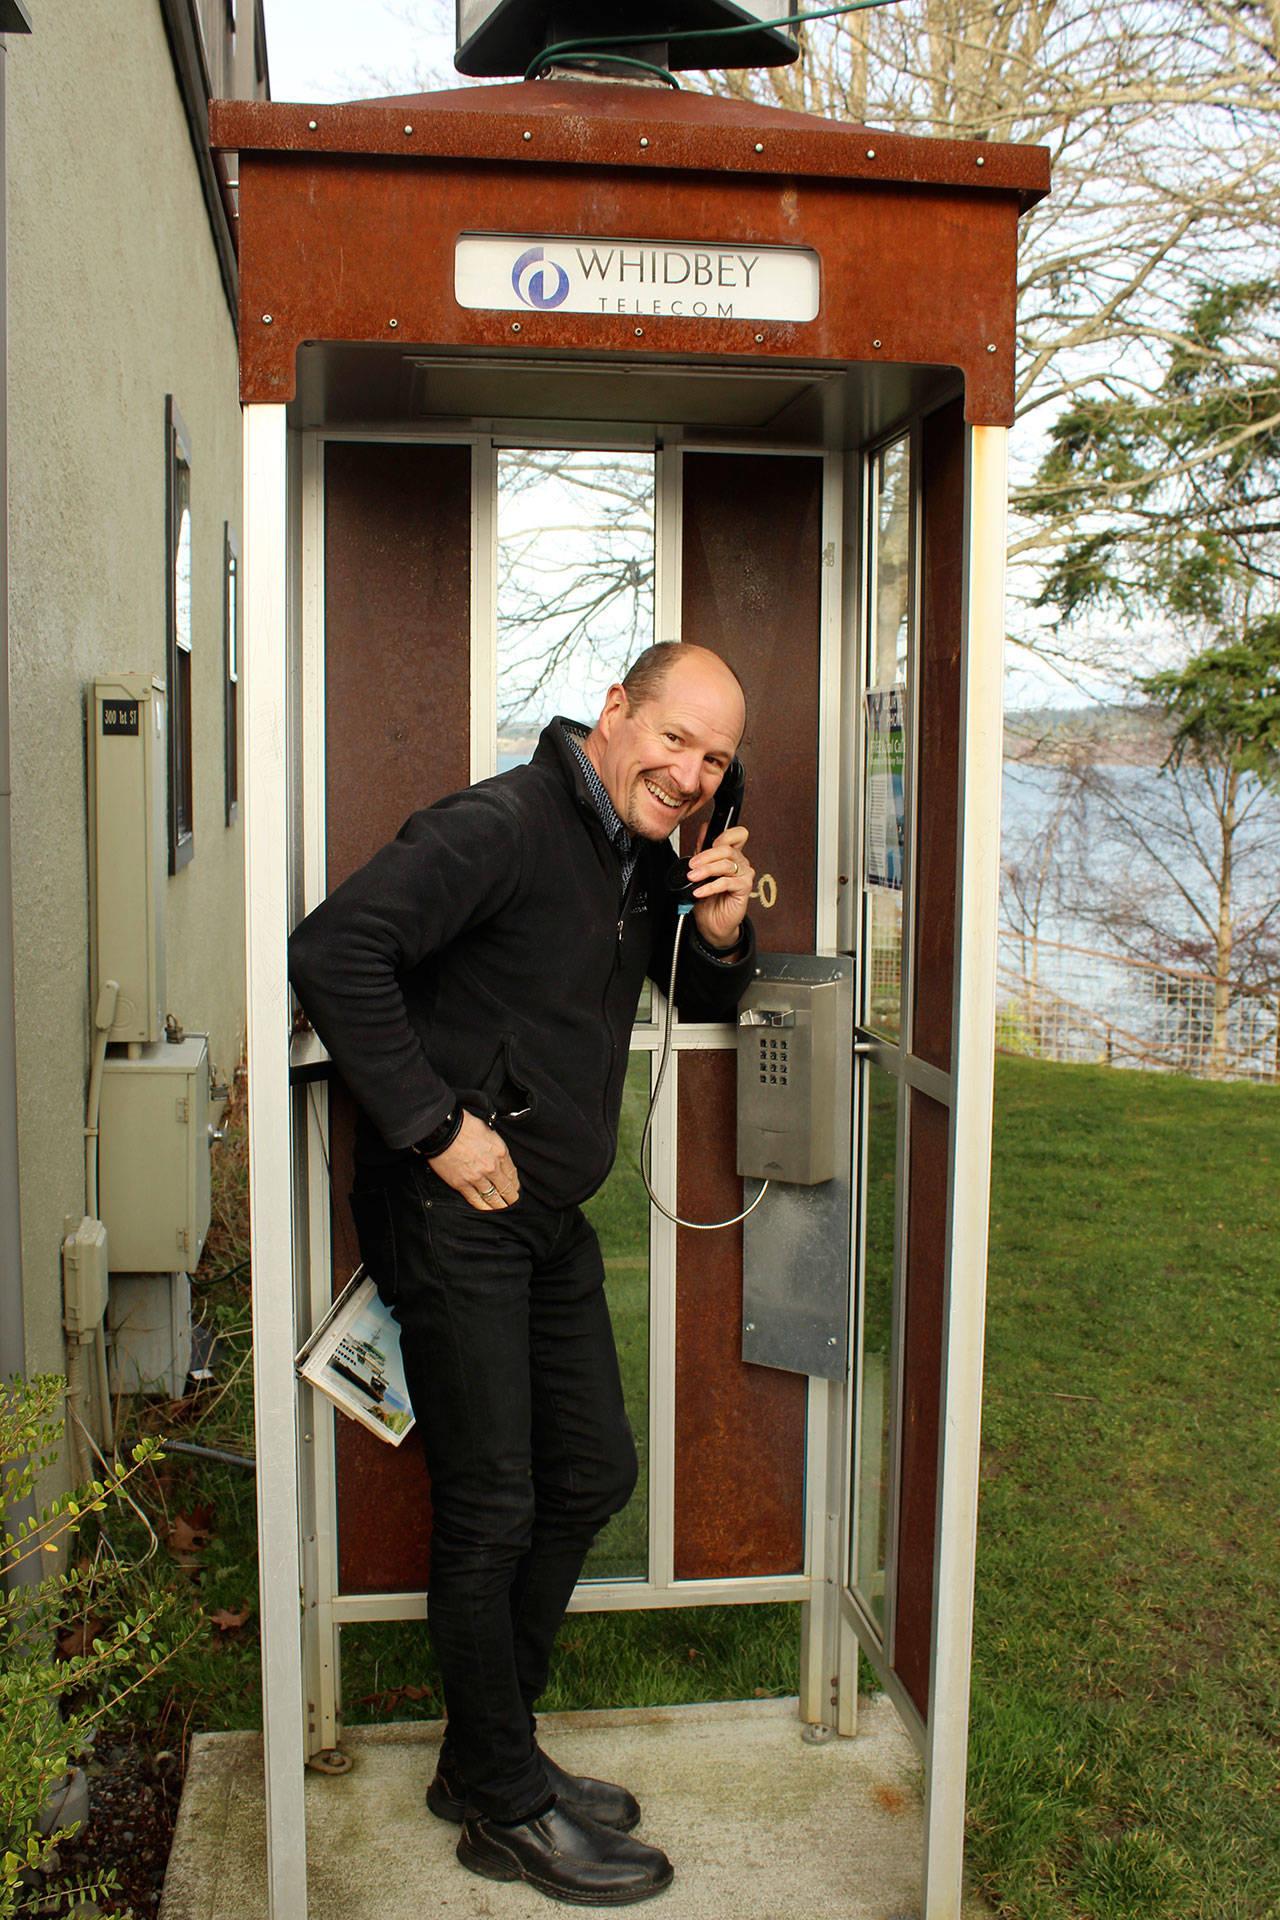 George Henny at one of 35 pay telephone booths Whidbey Telecom preserved and turned into a place to make free local calls. (Photo by Patricia Guthrie/Whidbey News Group)